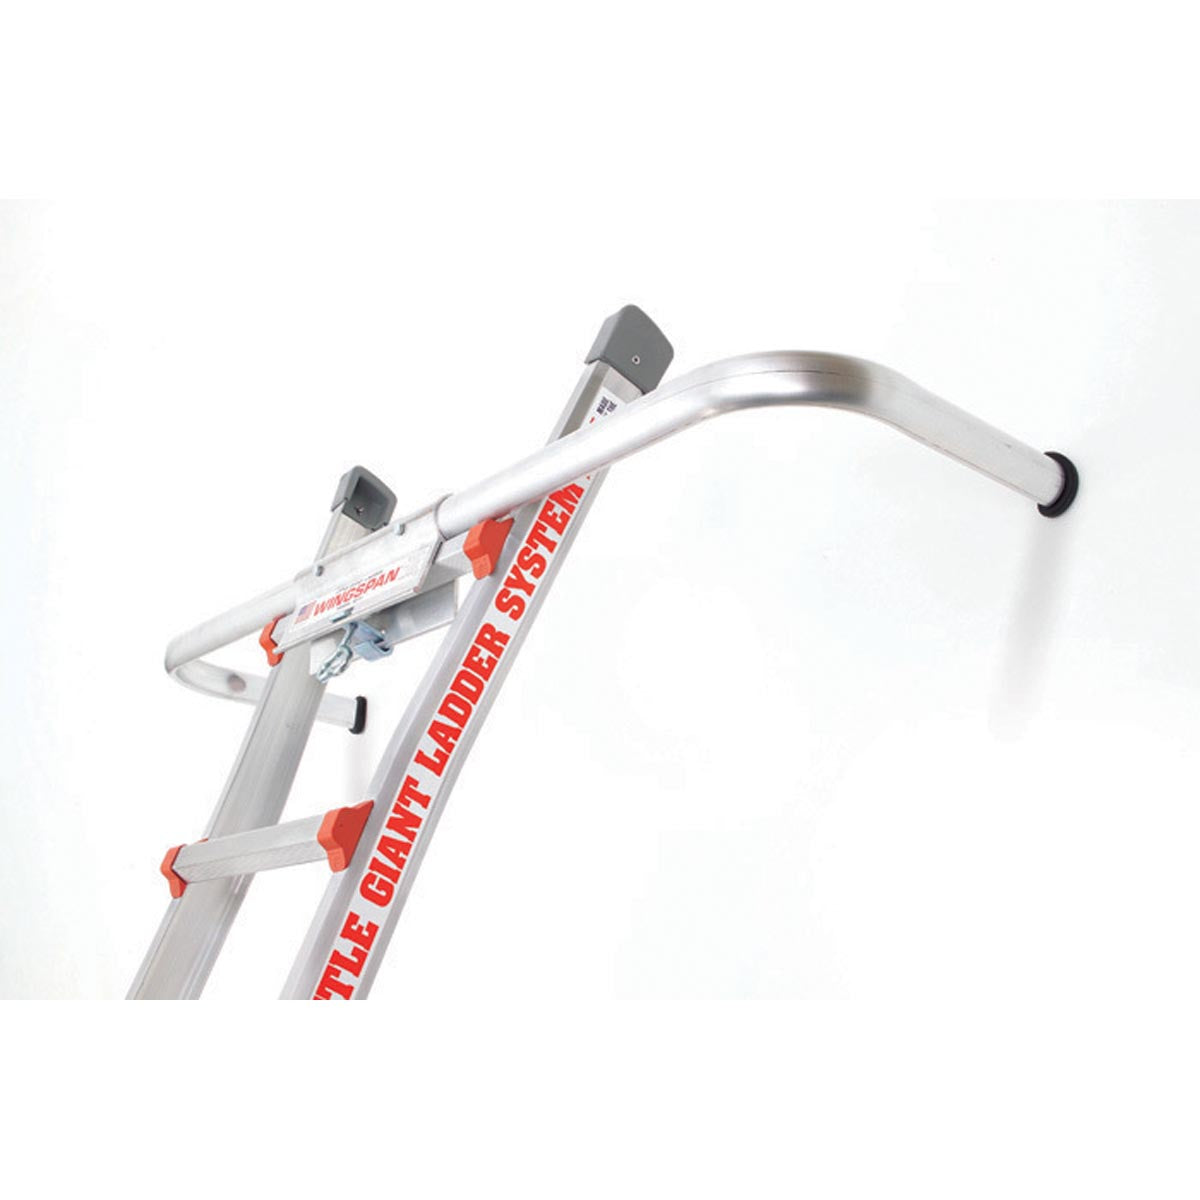 Little Giant Wing Span Wall Stand Off Accessory